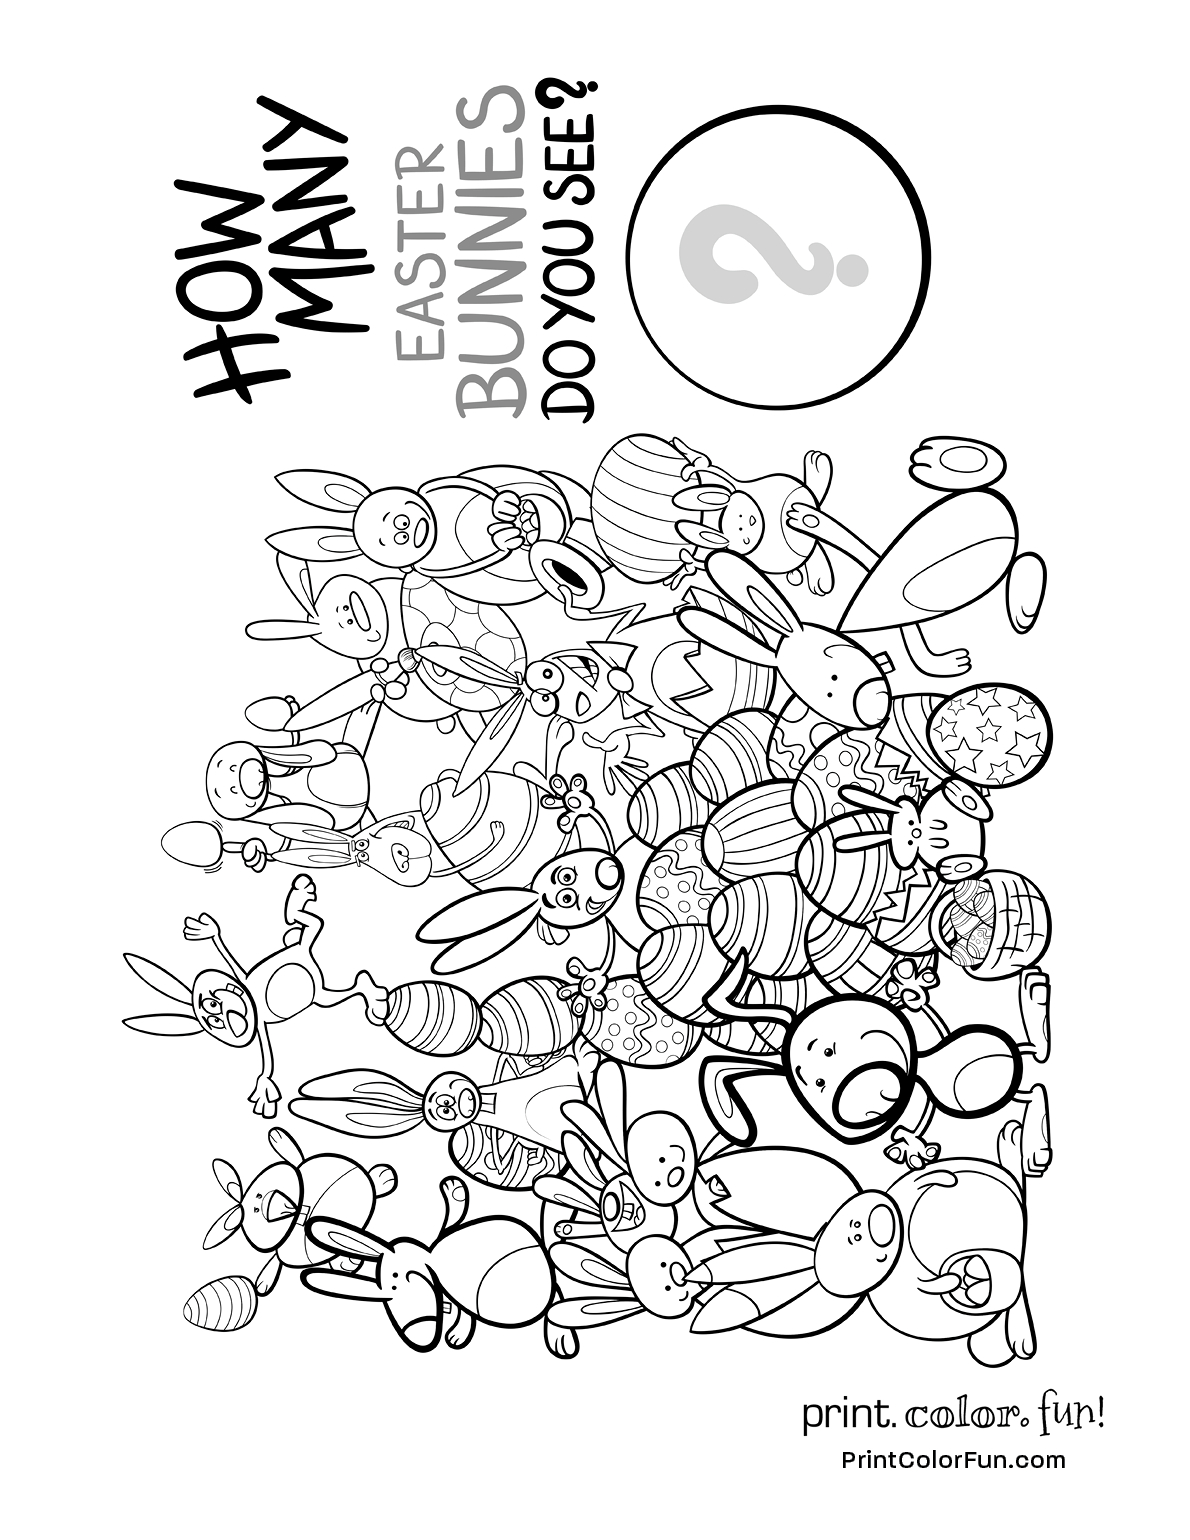 How Many Easter Bunnies Do You See - Puzzle Coloring Page - Print - Printable Bunny Puzzle